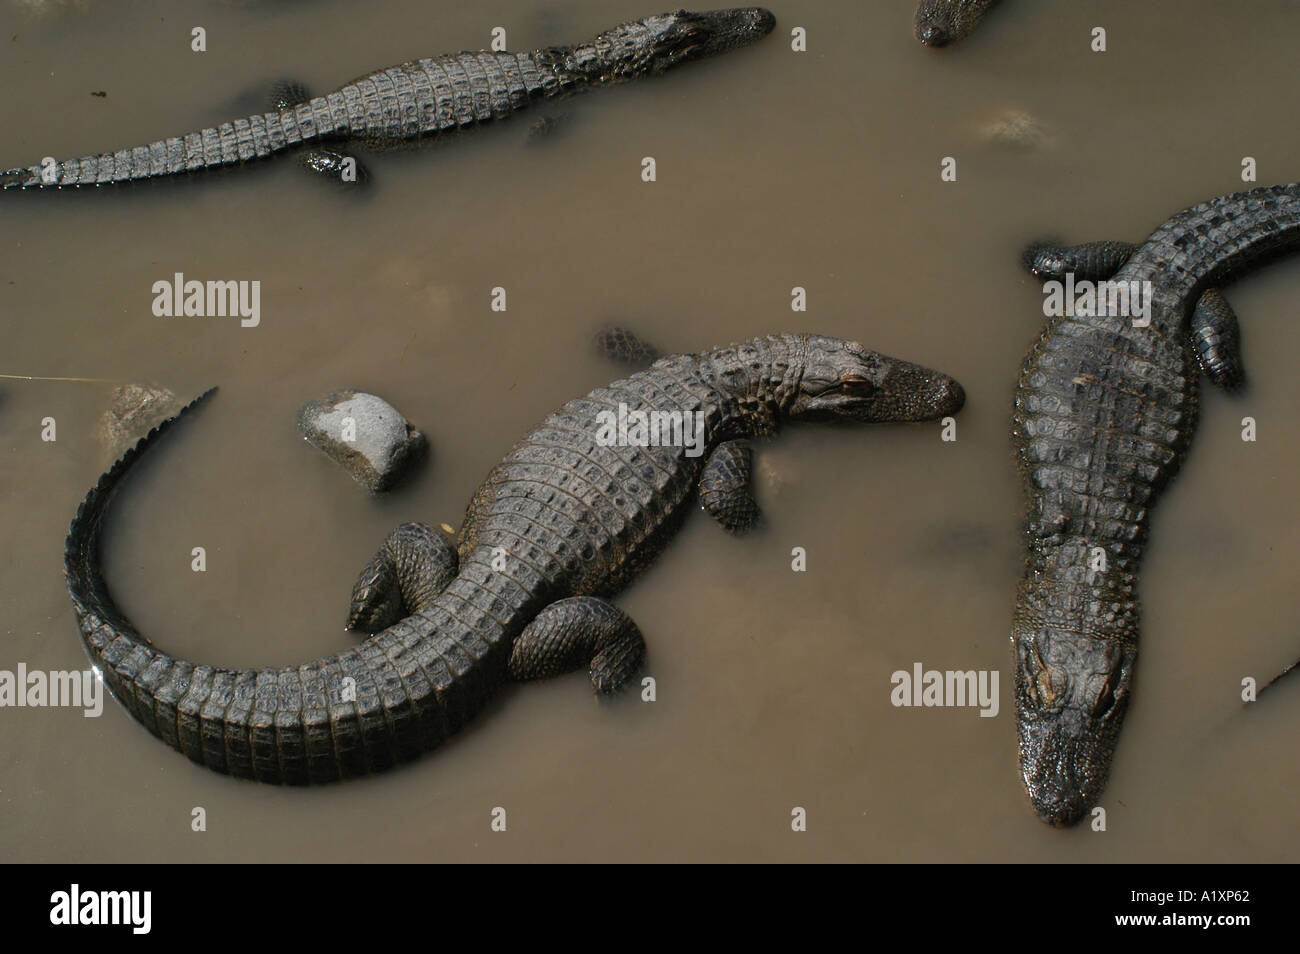 Young alligators swim in murky brown water with rocks sticking out of it at an alligator farm Colorado Stock Photo